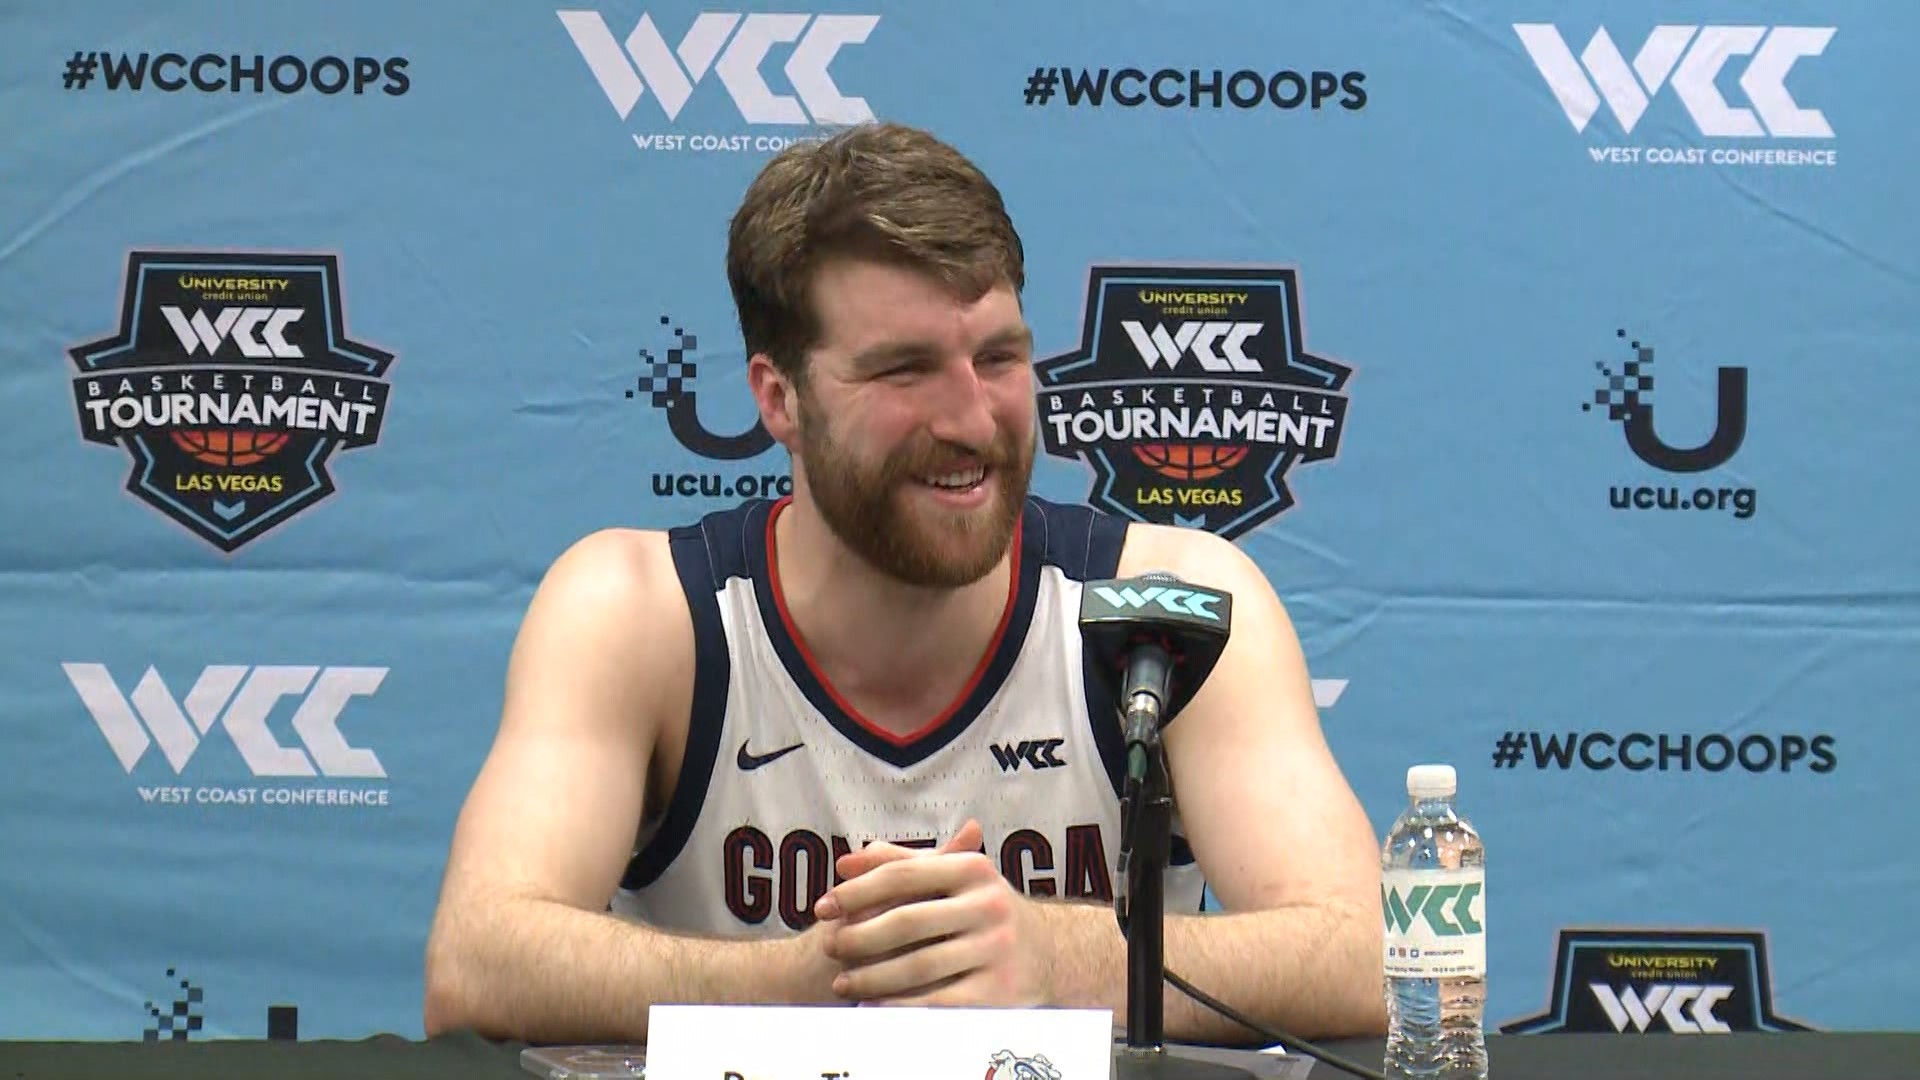 Gonzaga head coach Mark Few, and players Drew Timme and Anton Watson preview their matchup with Saint Mary's in the WCC Championship game.